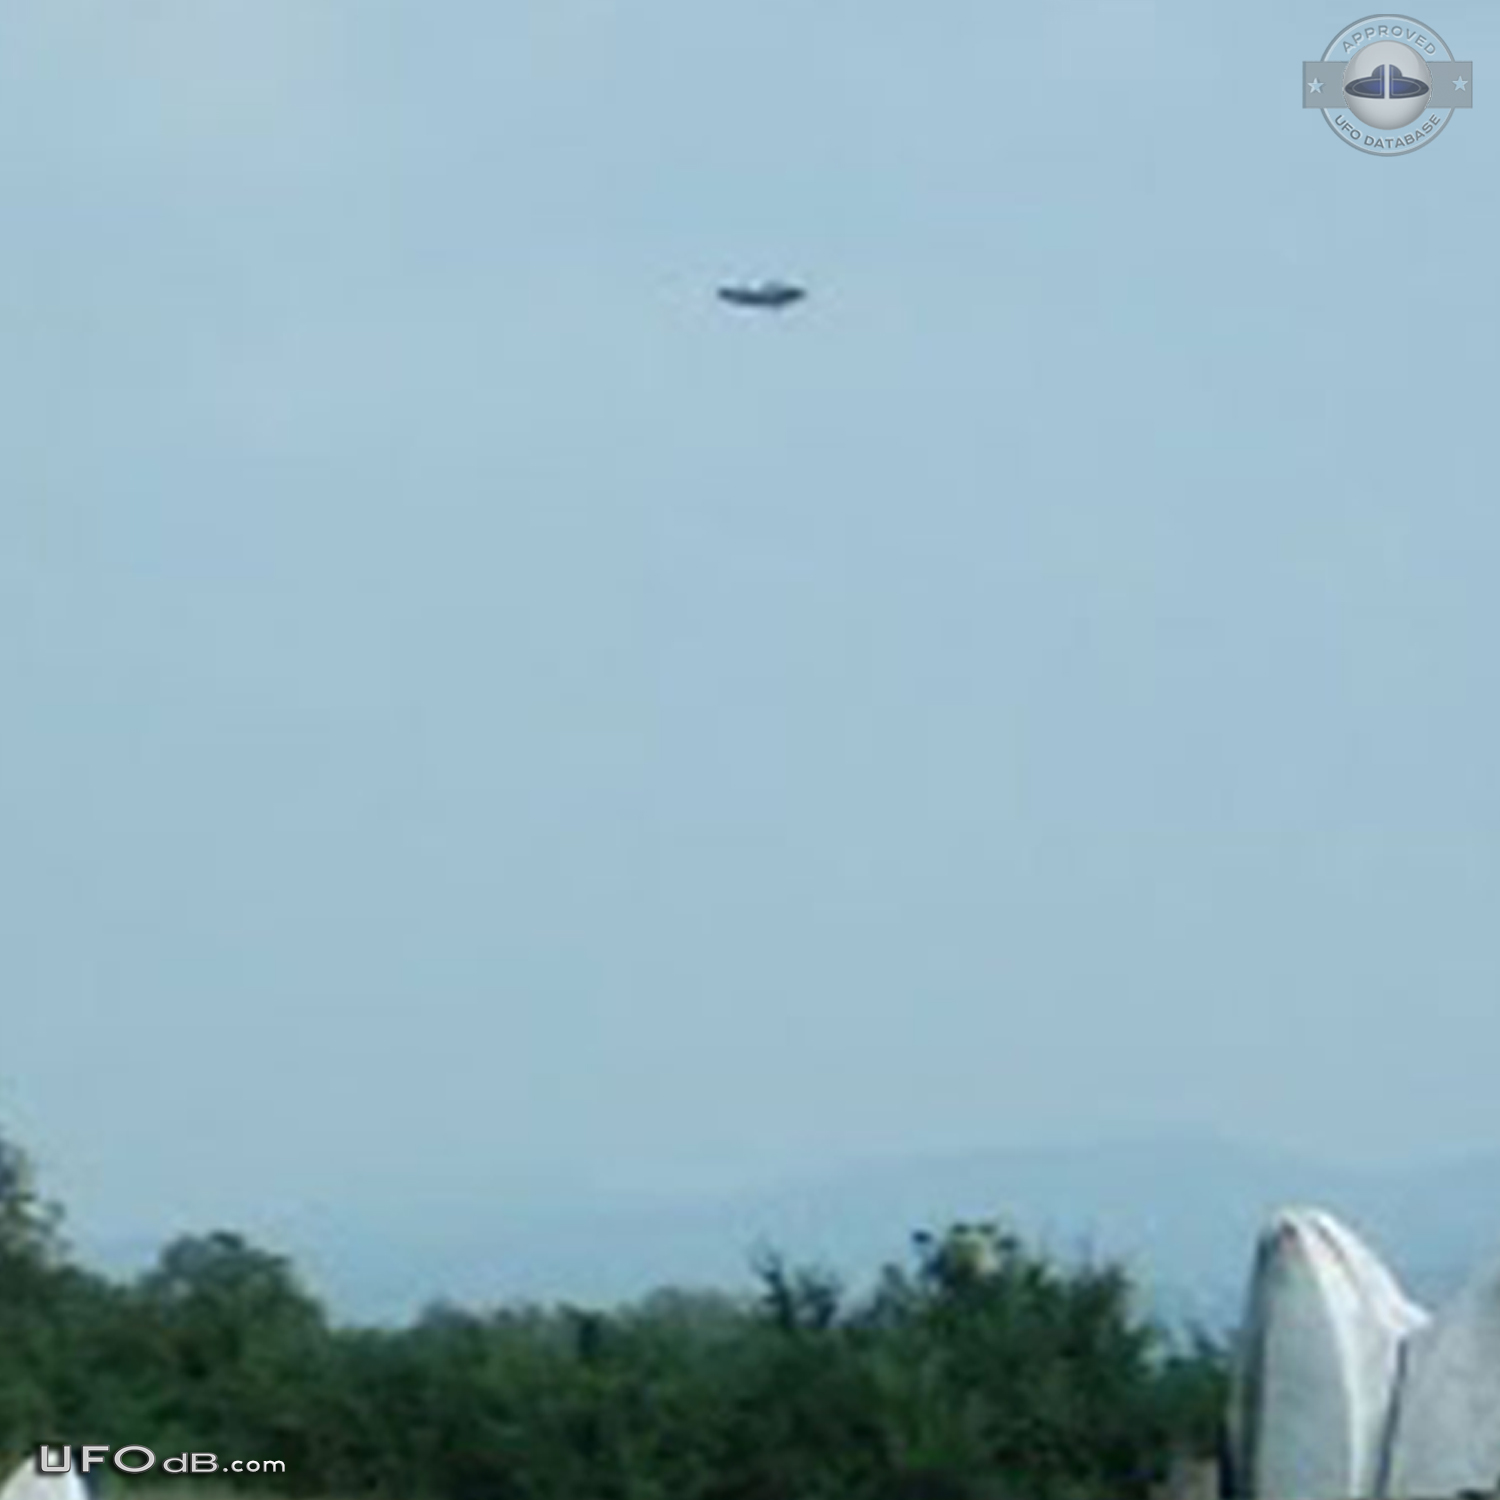 Monument picture reveals passing saucer UFO in Kragujevac, Serbia 2004 UFO Picture #457-4